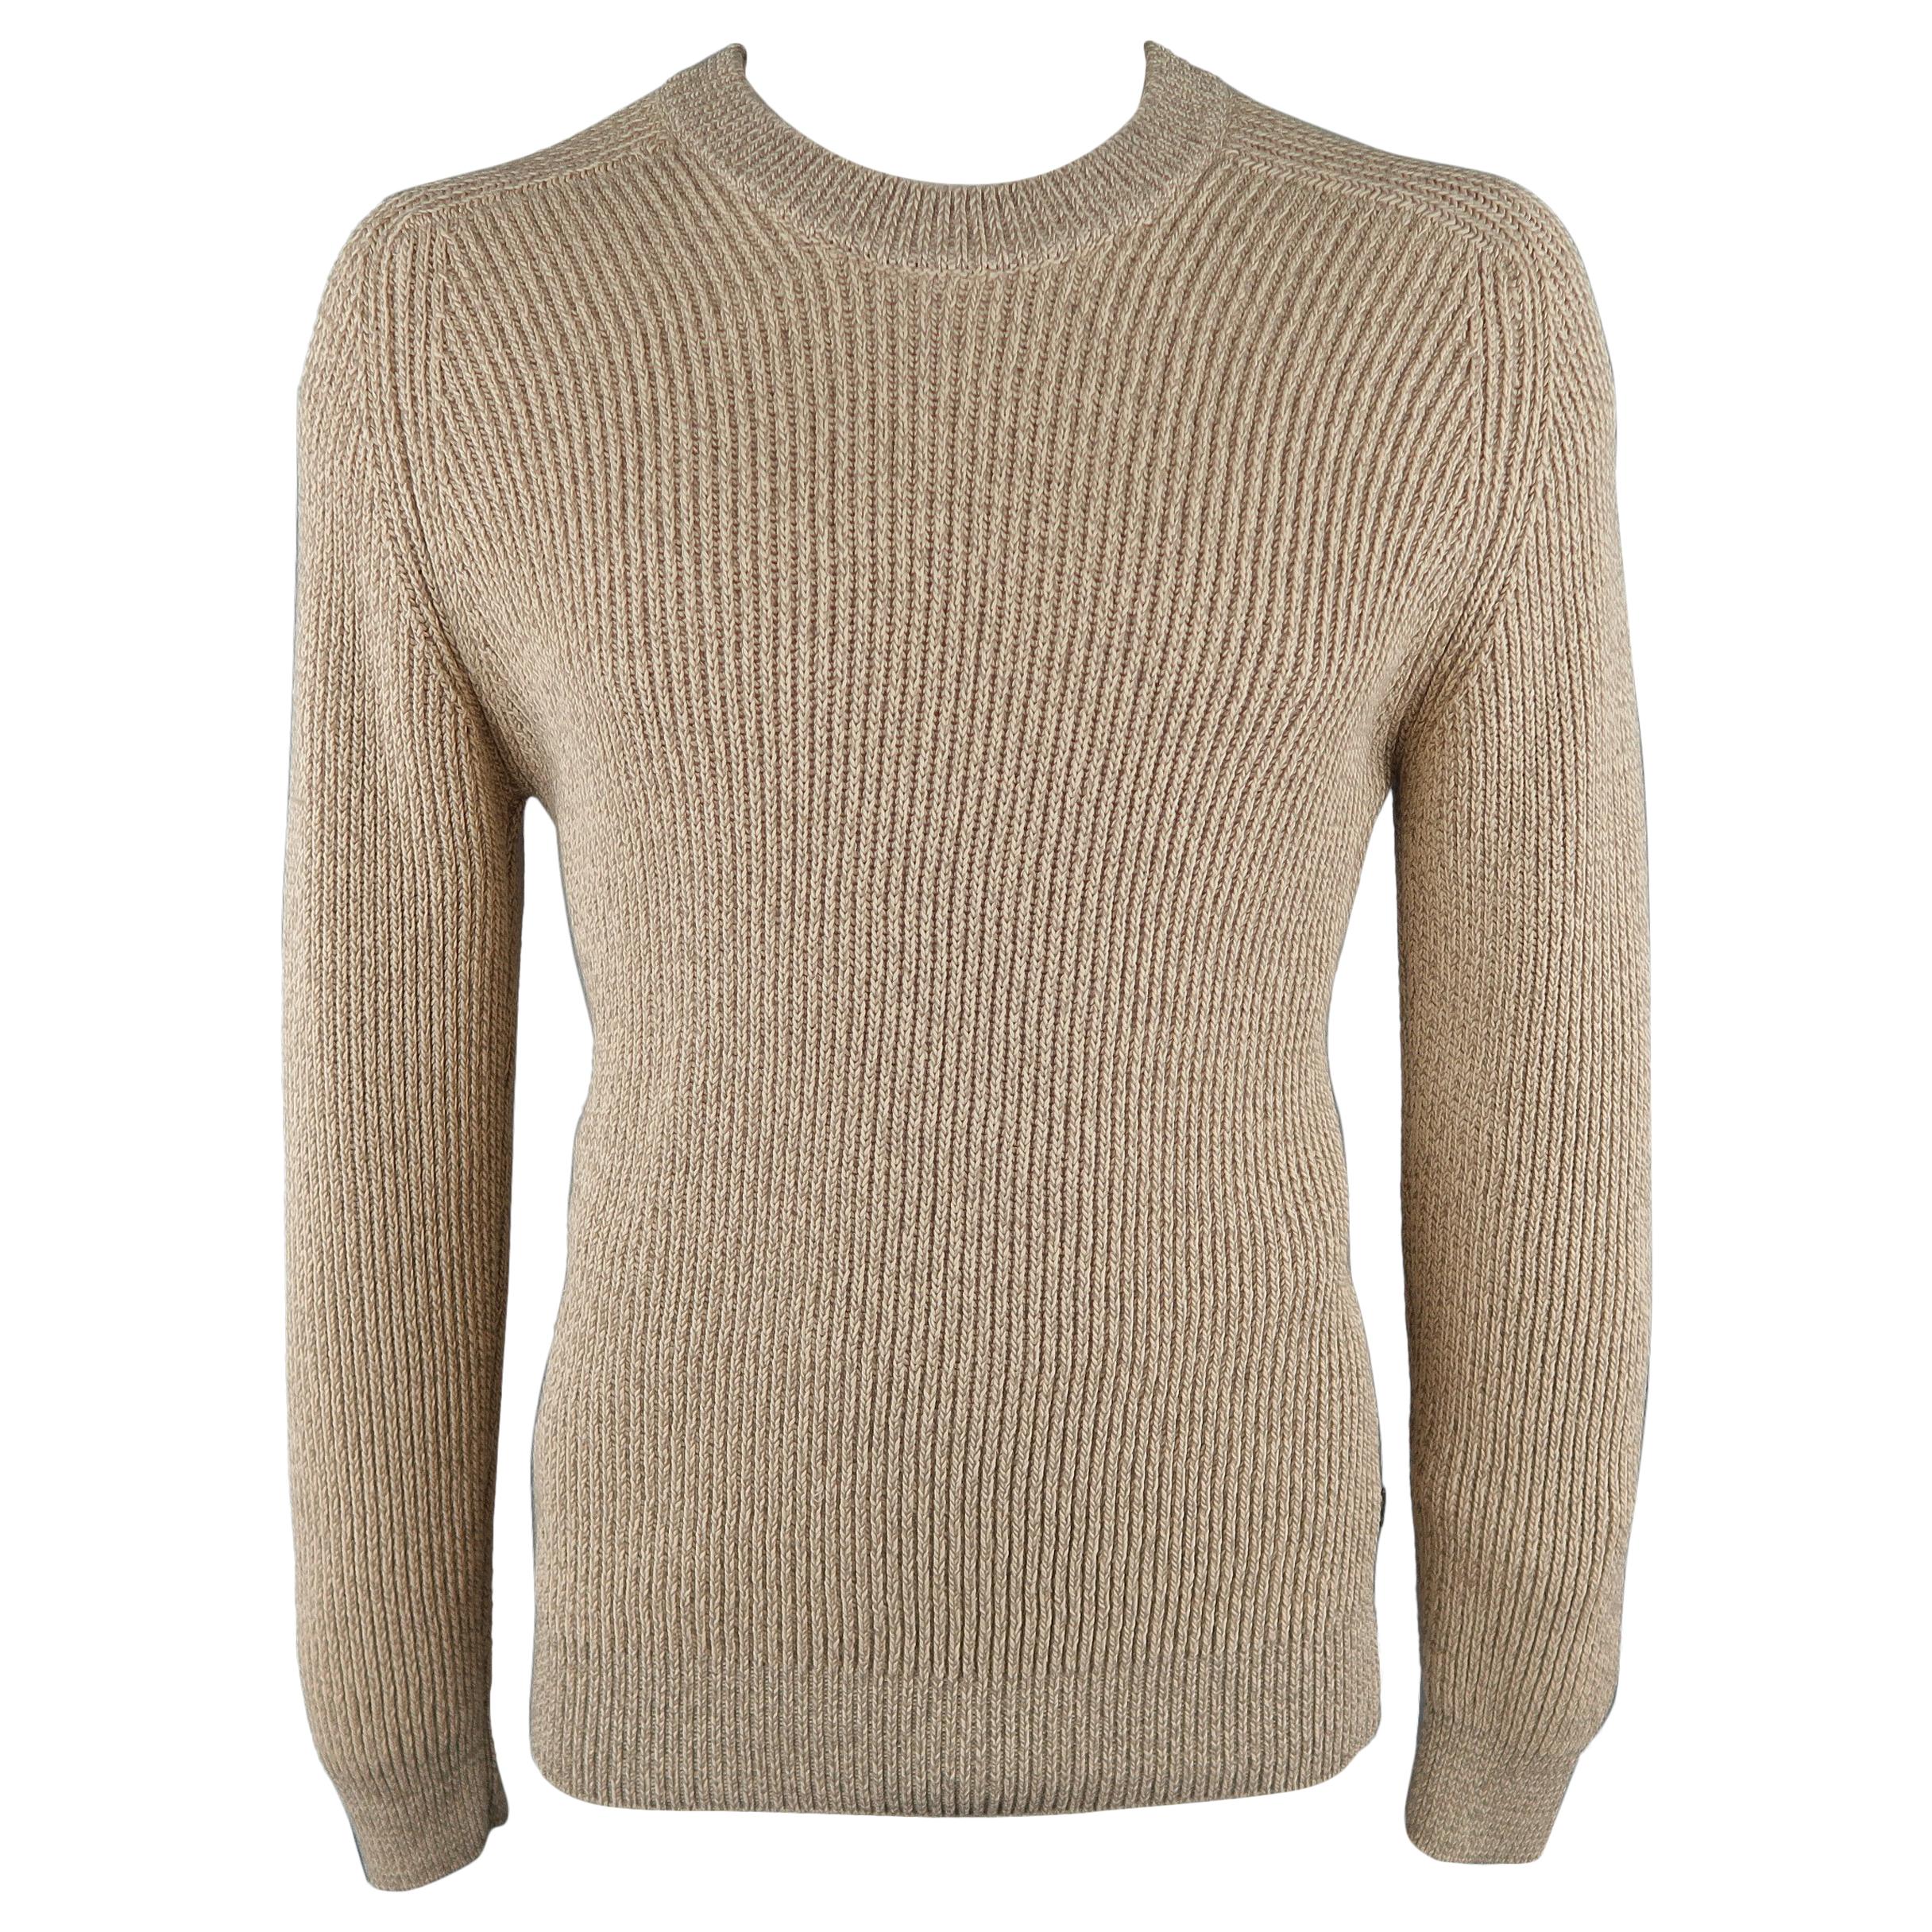 GUCCI Size M Oatmeal Ribbed Knit Cotton Crew-Neck Sweater